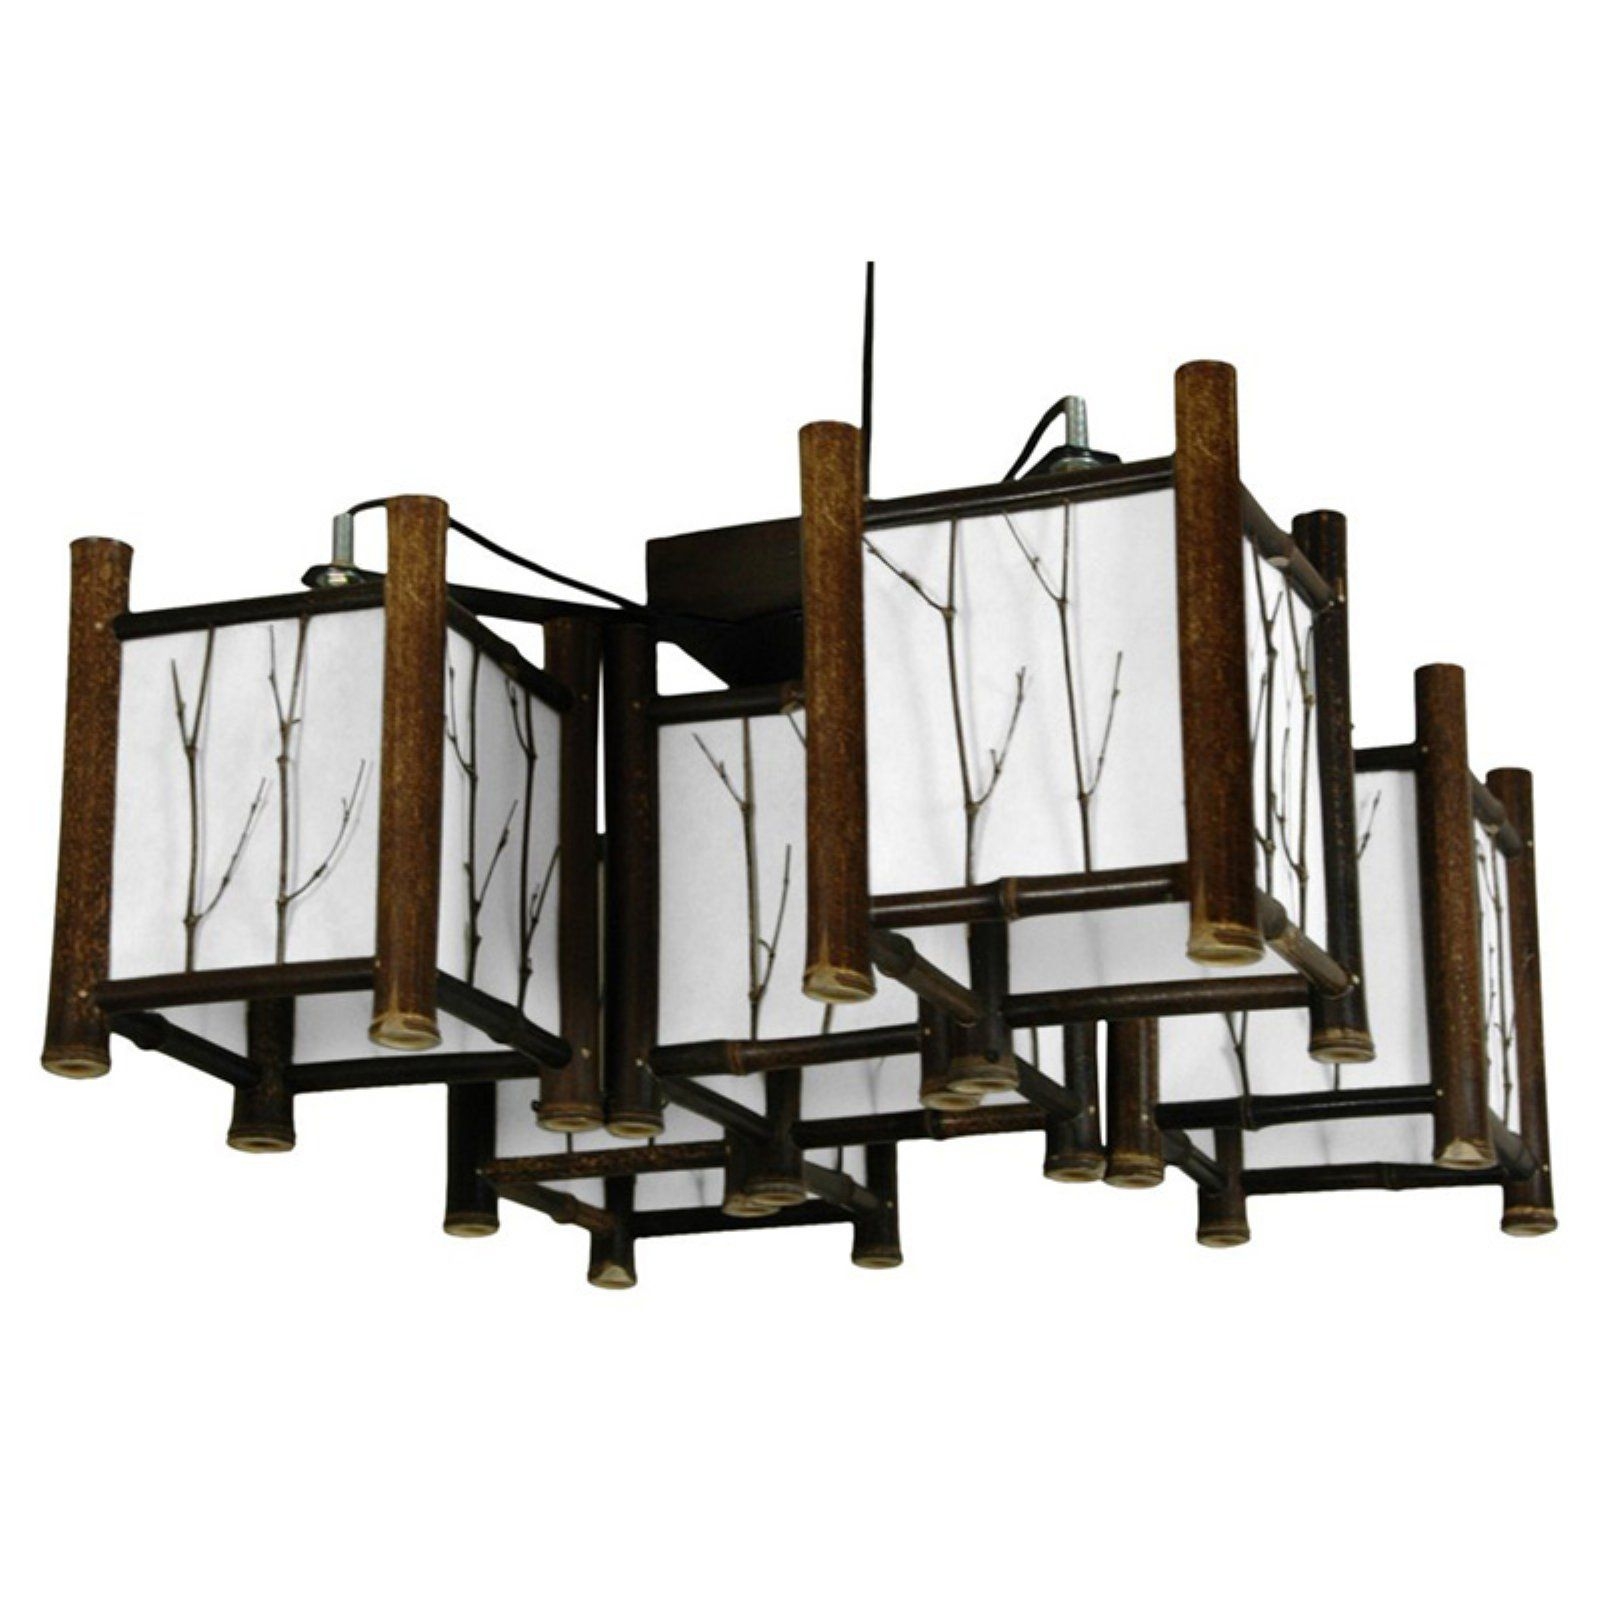 Japanese style ceiling lights